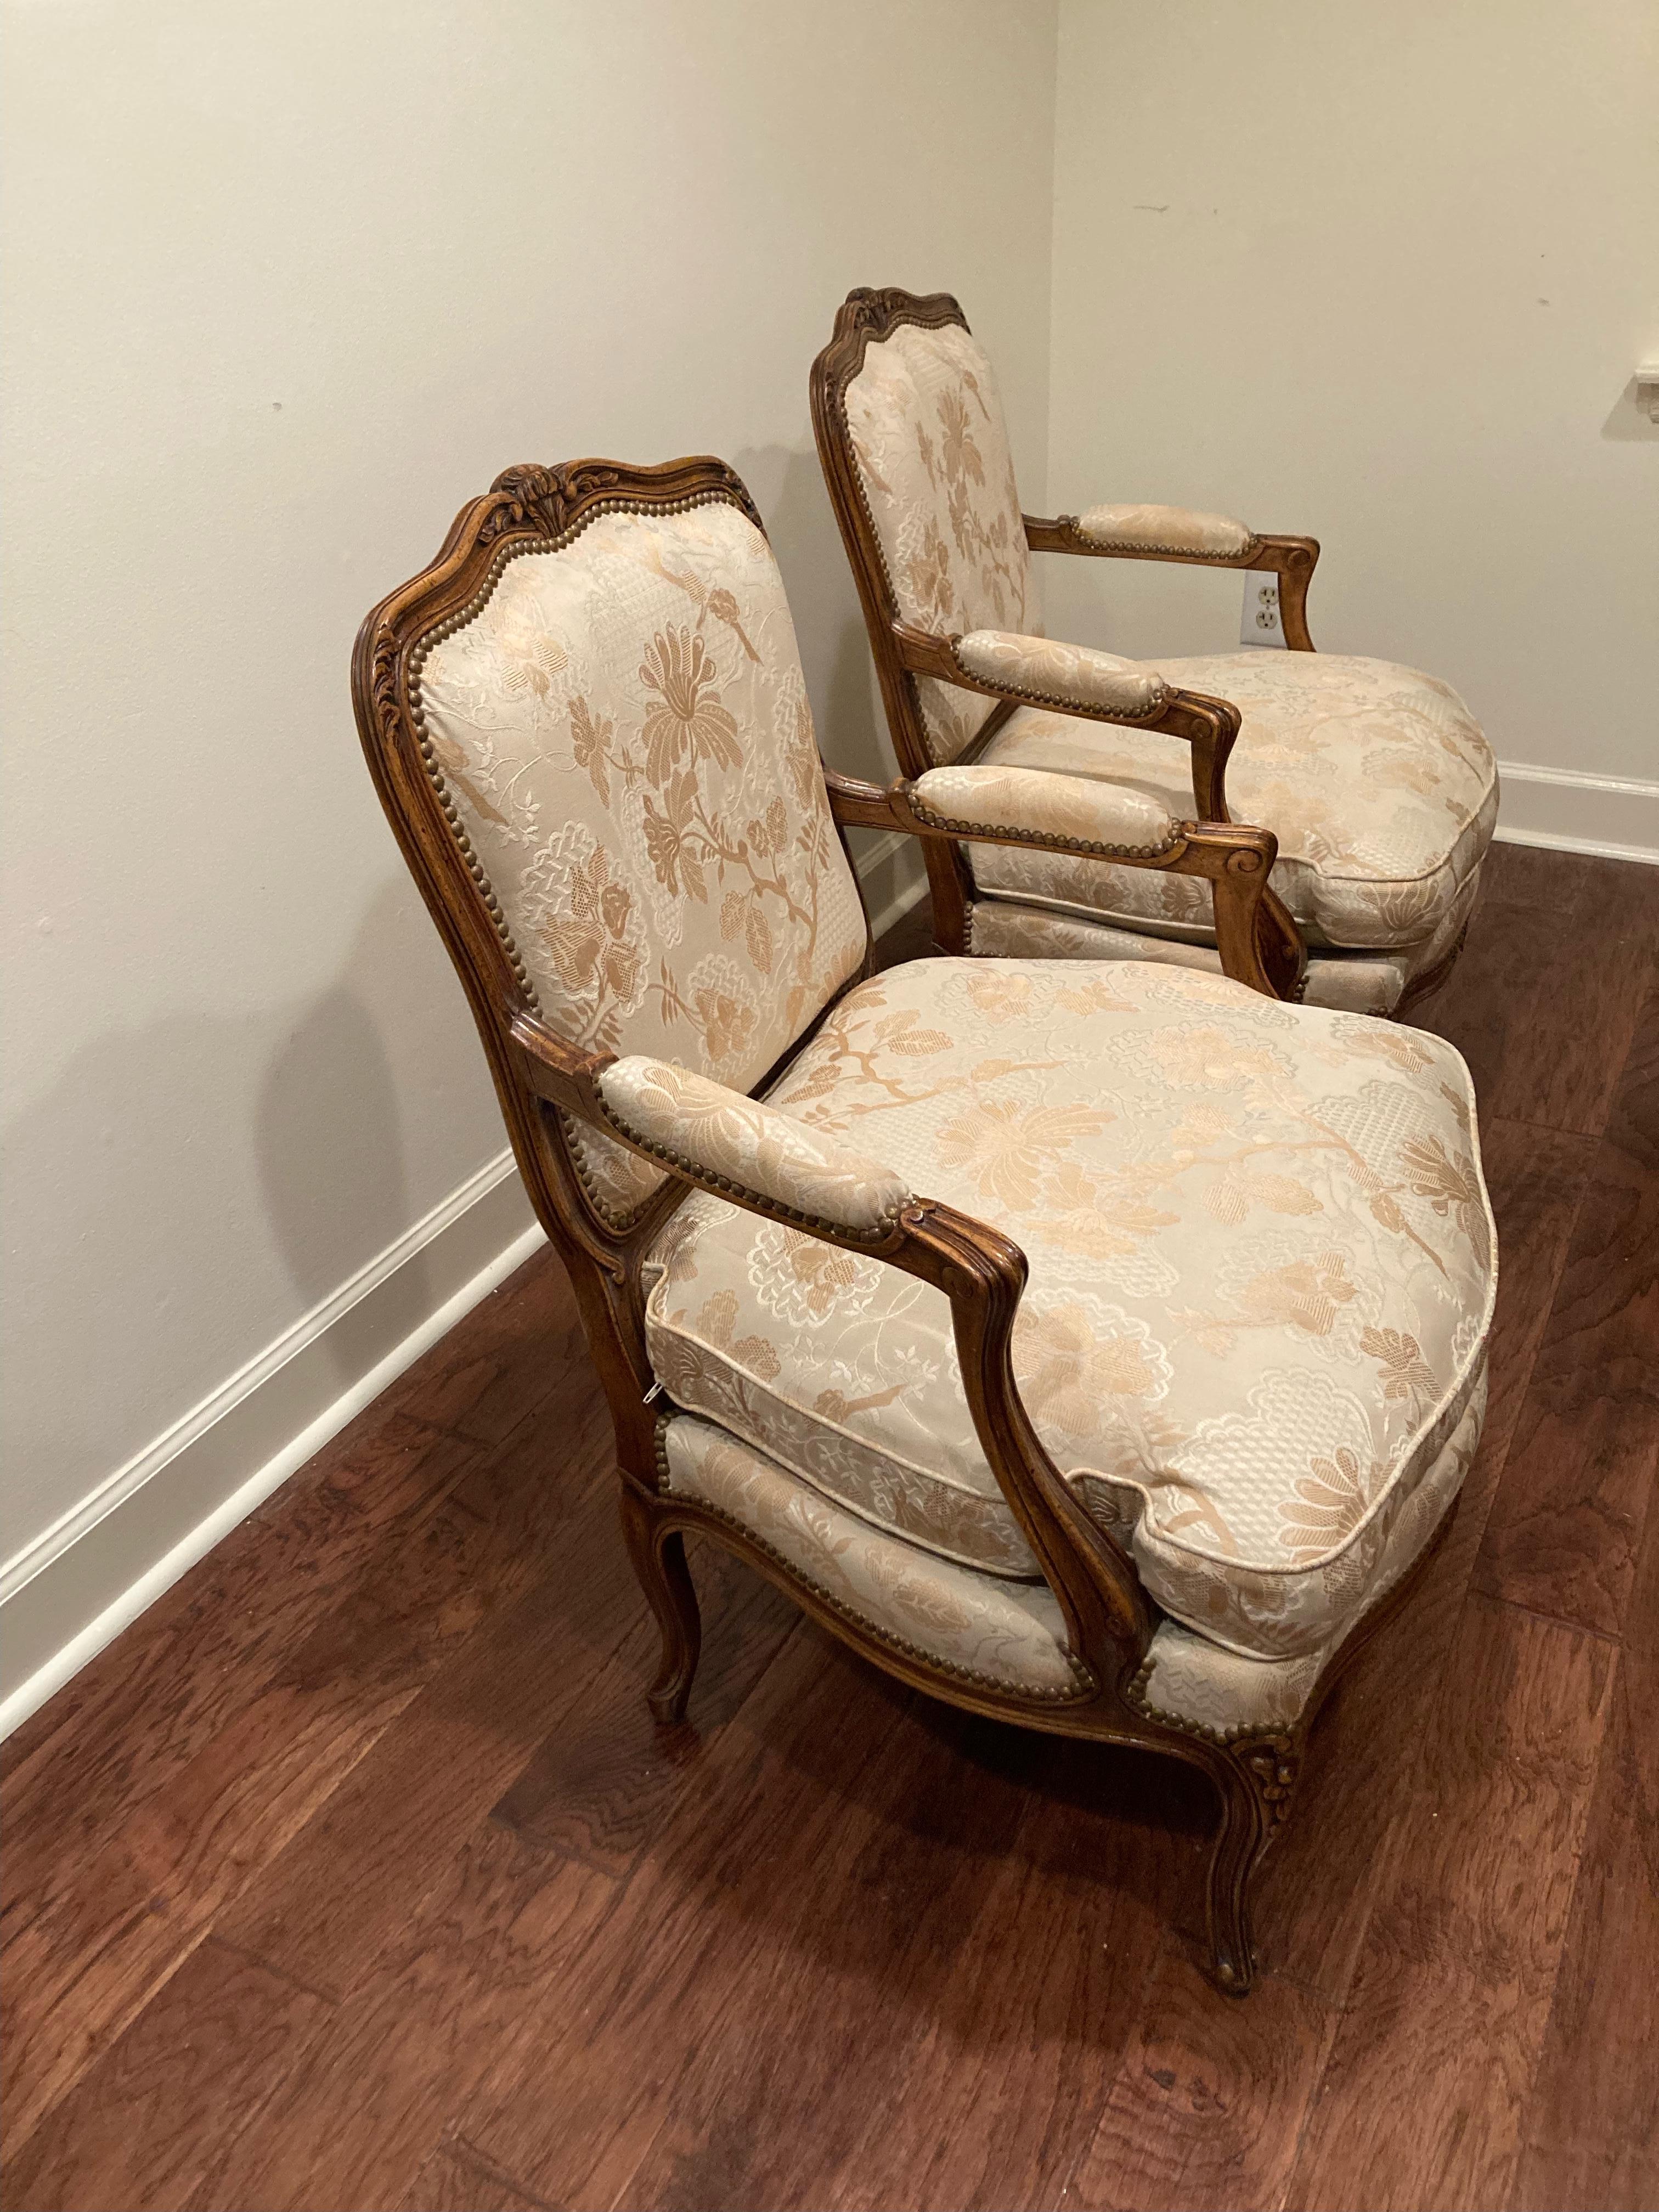 Elegant pair of classic Louis XV style fautueil armchairs having carved walnut frames and floral tonal creme and beige textured damask fabric. 
Seats are down filled. Style is almost identical to George Smith Louis bergeres but these are by high